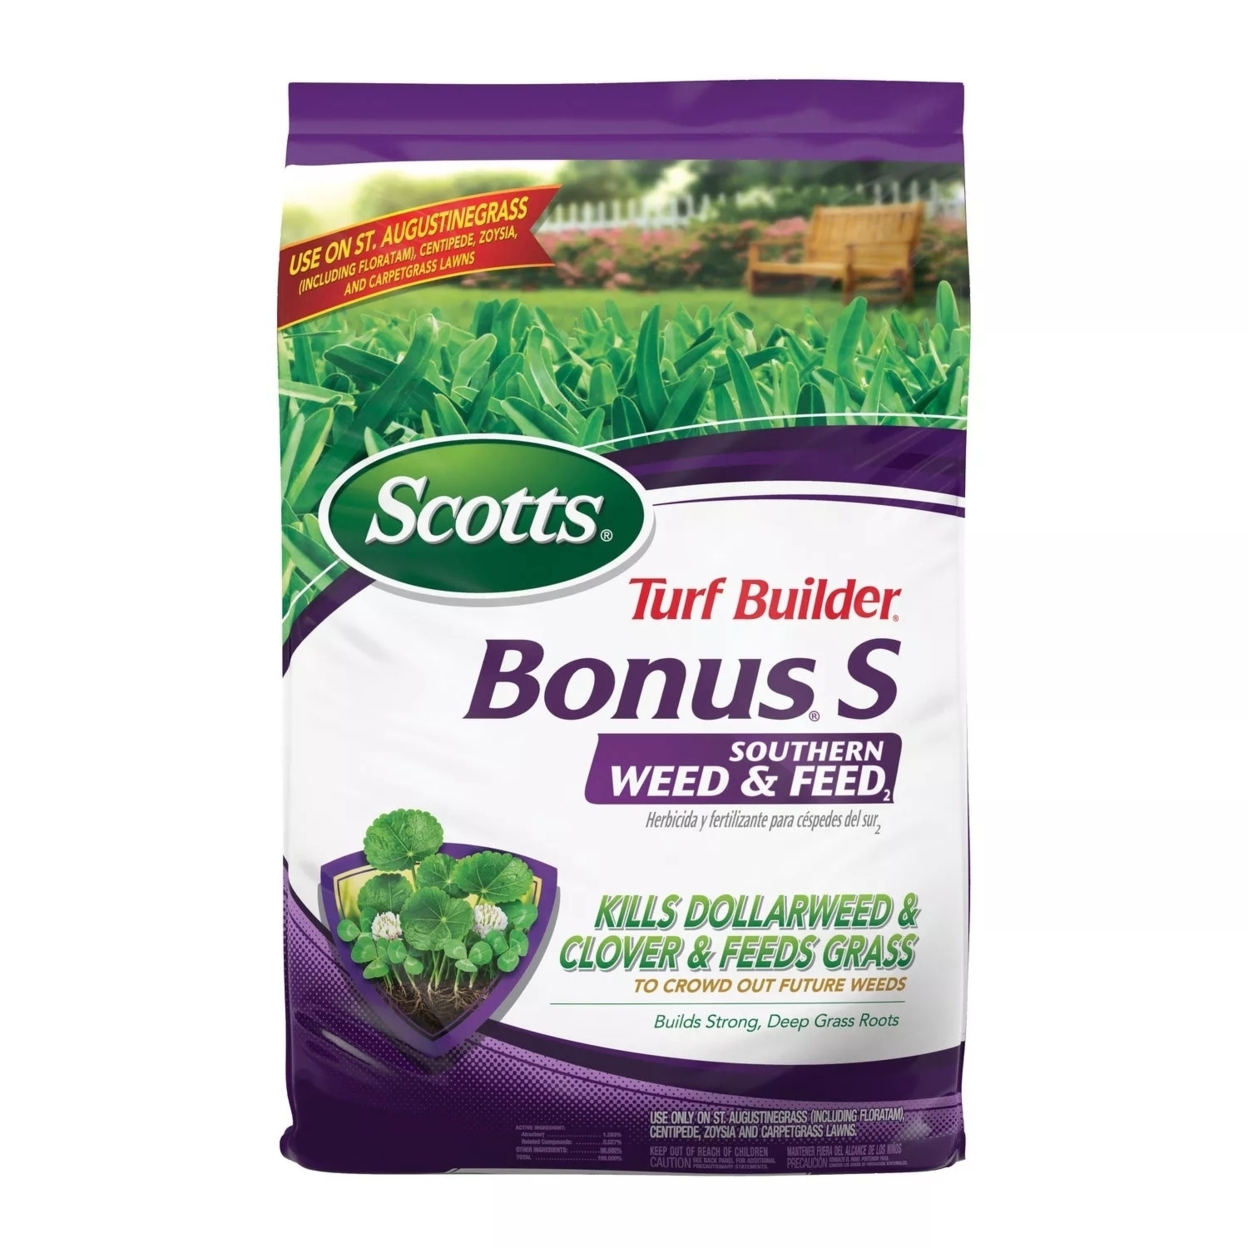 Scotts Turf Builder Bonus S Southern Weed & Feed, 48.27 Pounds